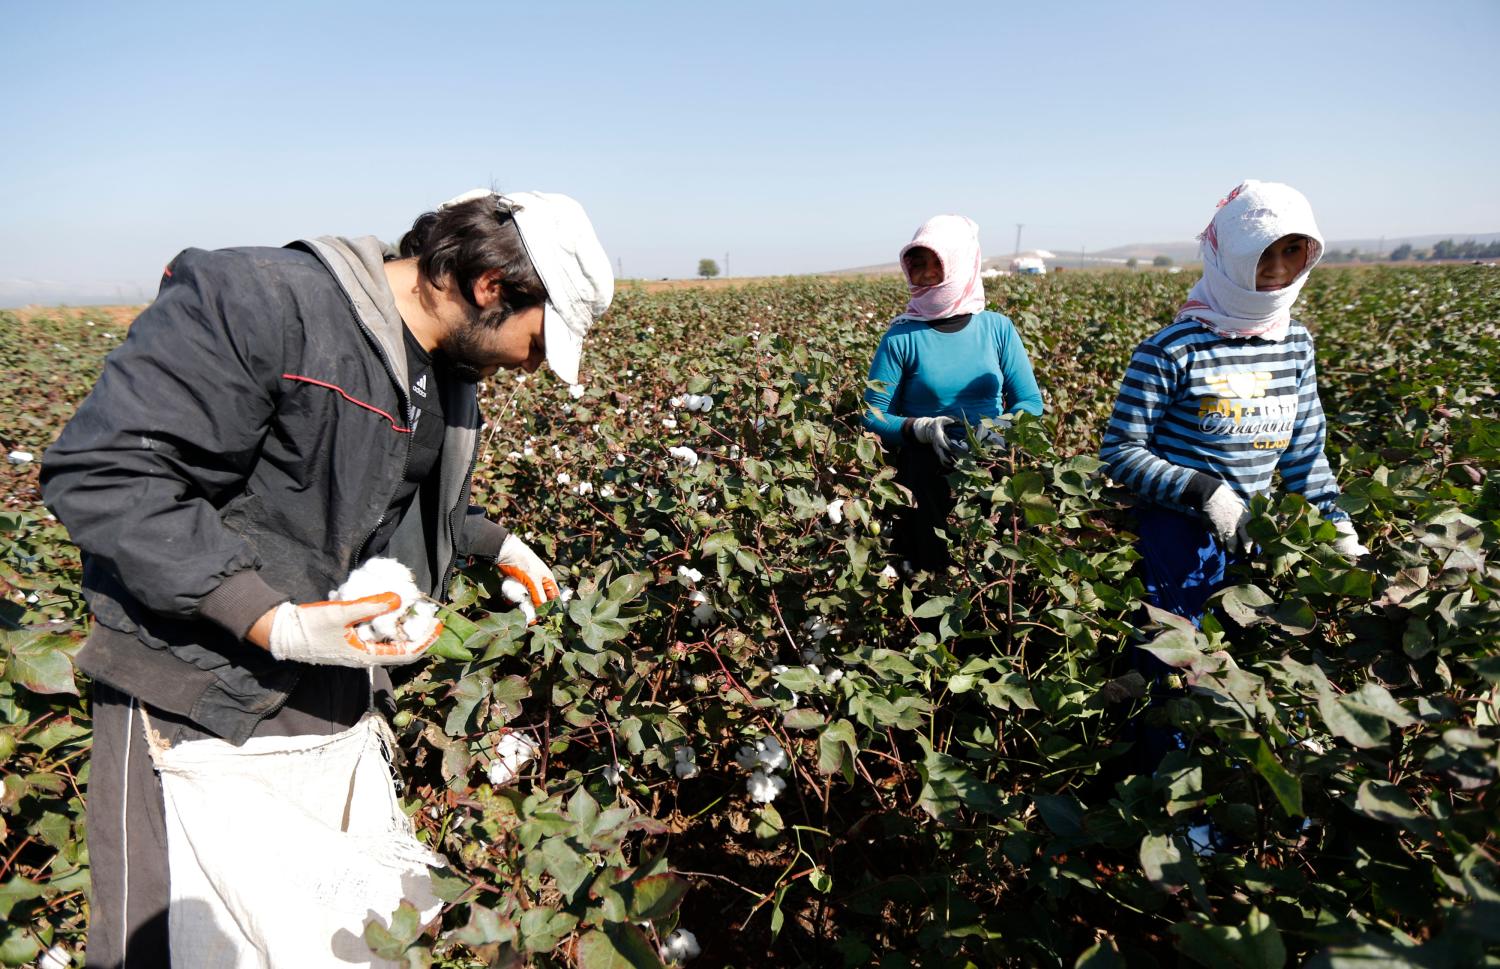 Syrian refugees pick up cotton from a field in the village of Bukulmez on the Turkish-Syrian border, in Hatay province, November 3, 2012. Despite the conflict on the Syrian side of the border, cotton harvest is still underway in Turkey's southern border province of Hatay. During early October, the Turkish military launched a retaliatory strike on Syria after a mortar bomb fired from Syrian soil landed in the countryside in Hatay. Some Syrian refugees work at cotton fields together with Turkish villagers in the border region as cottons pickers. Picture taken November 3, 2012. REUTERS/Murad Sezer (TURKEY - Tags: AGRICULTURE POLITICS) - GM1E8B509FD01